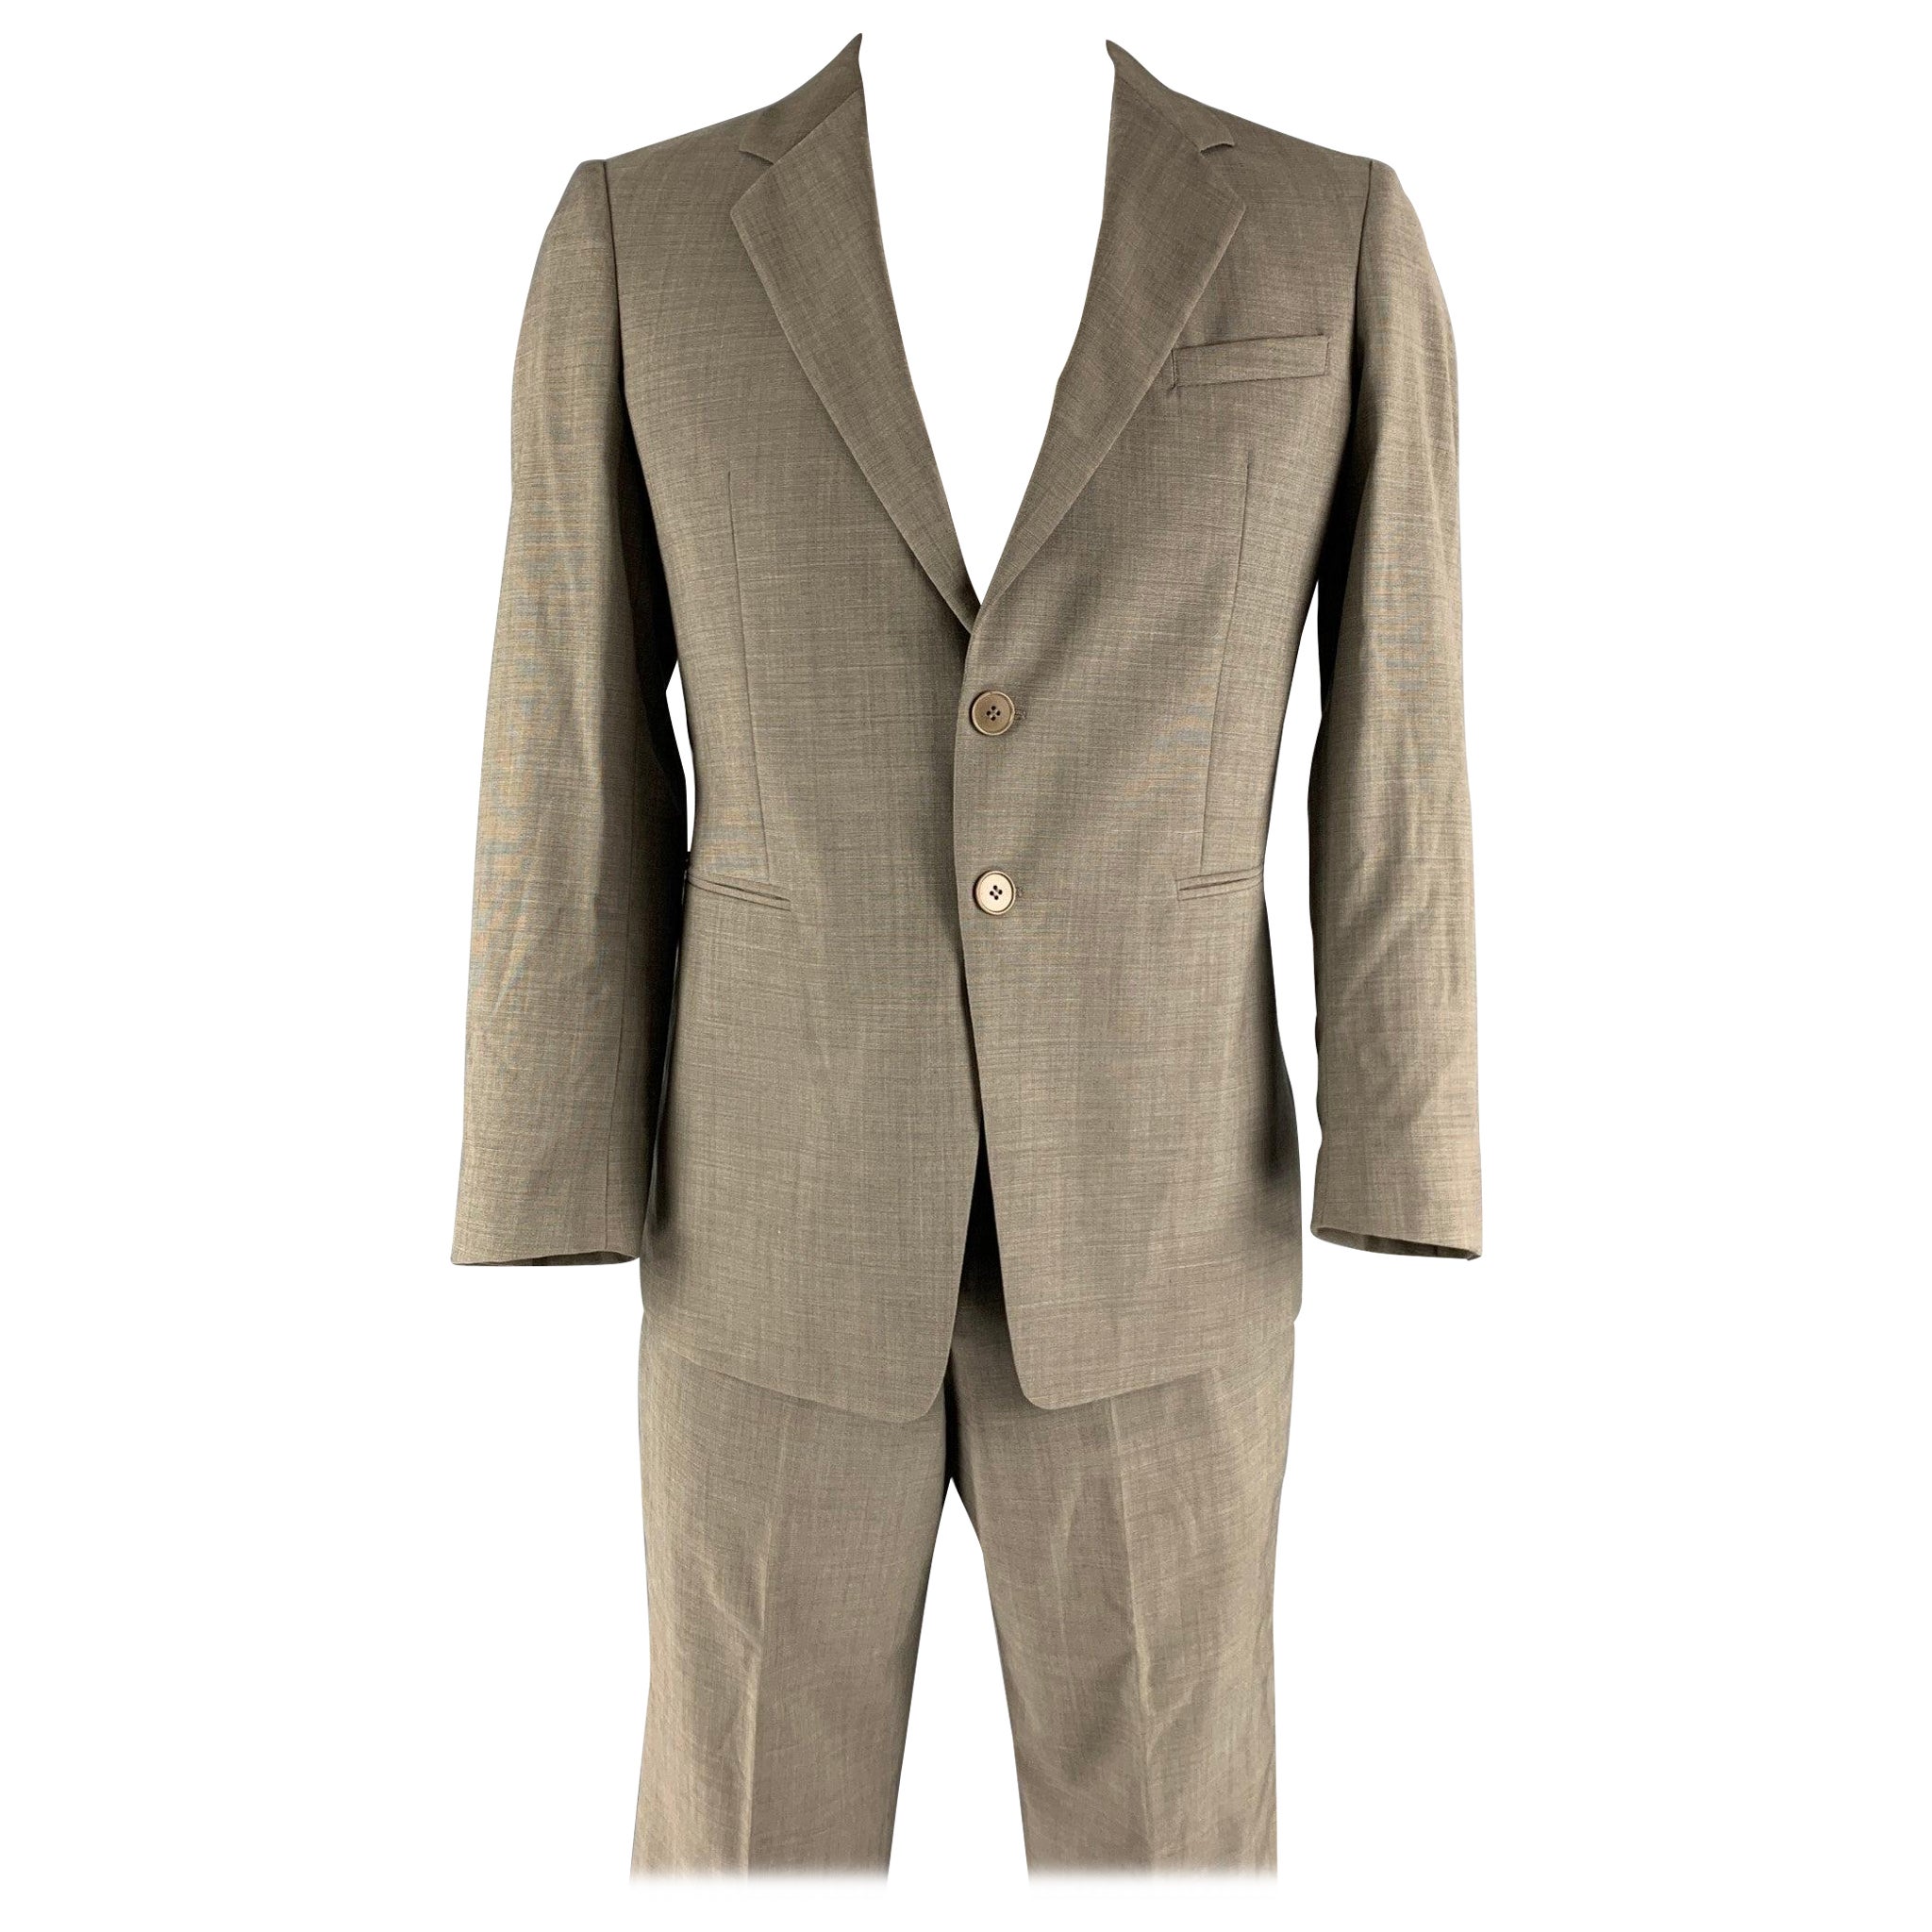 EMPORIO ARMANI Size 42 Taupe Solid Wool Notch Lapel Suit